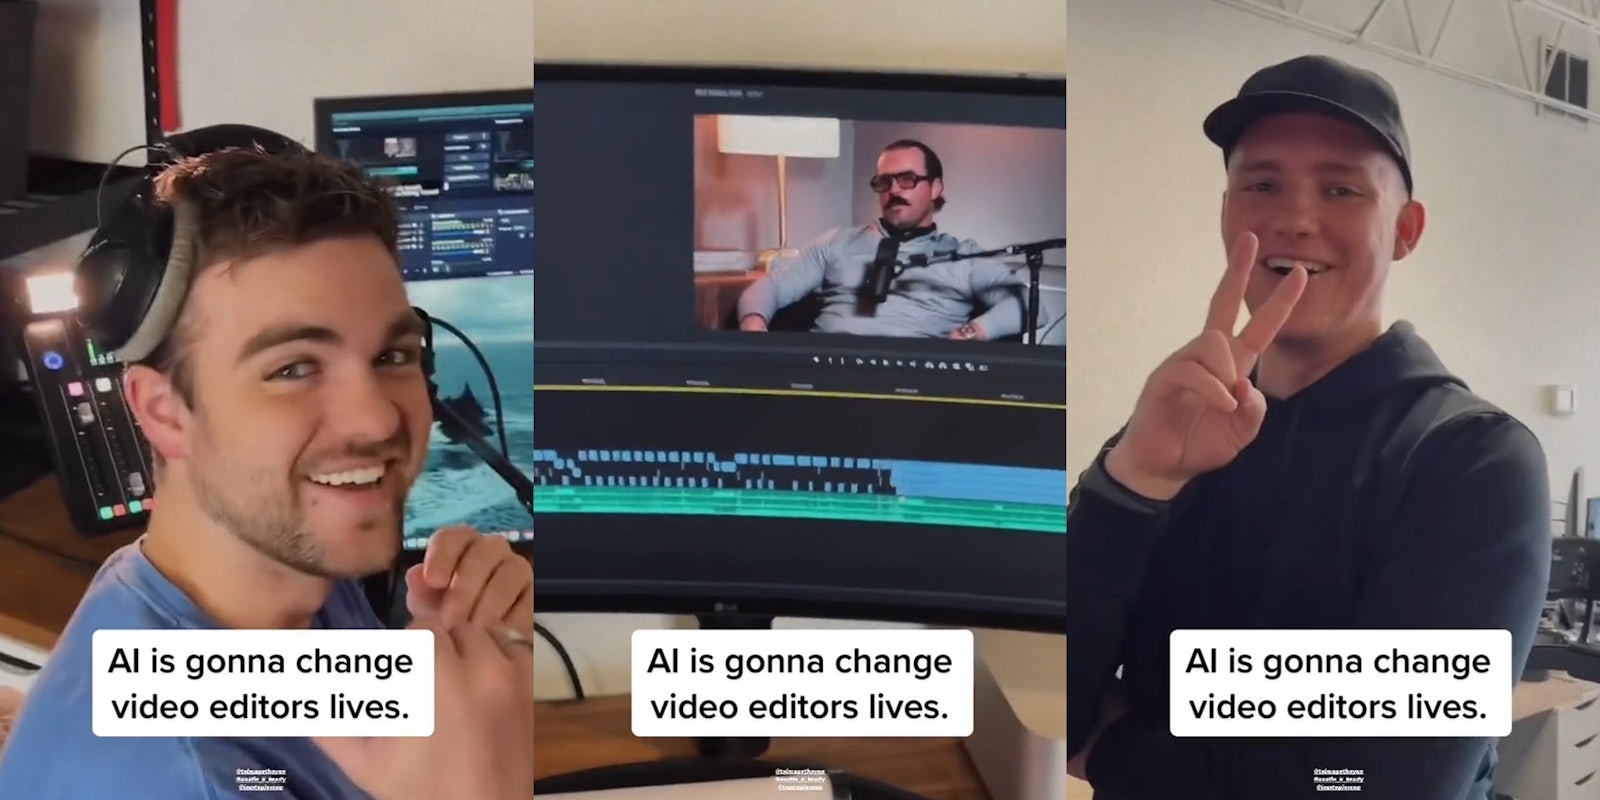 video editor with headphones on smiling with caption 'AI is gonna change video editors lives.' (l) video in the process of being edited with caption 'AI is gonna change video editors lives.' (c) video editor with 2 fingers up with caption 'AI is gonna change video editors lives.' (r)